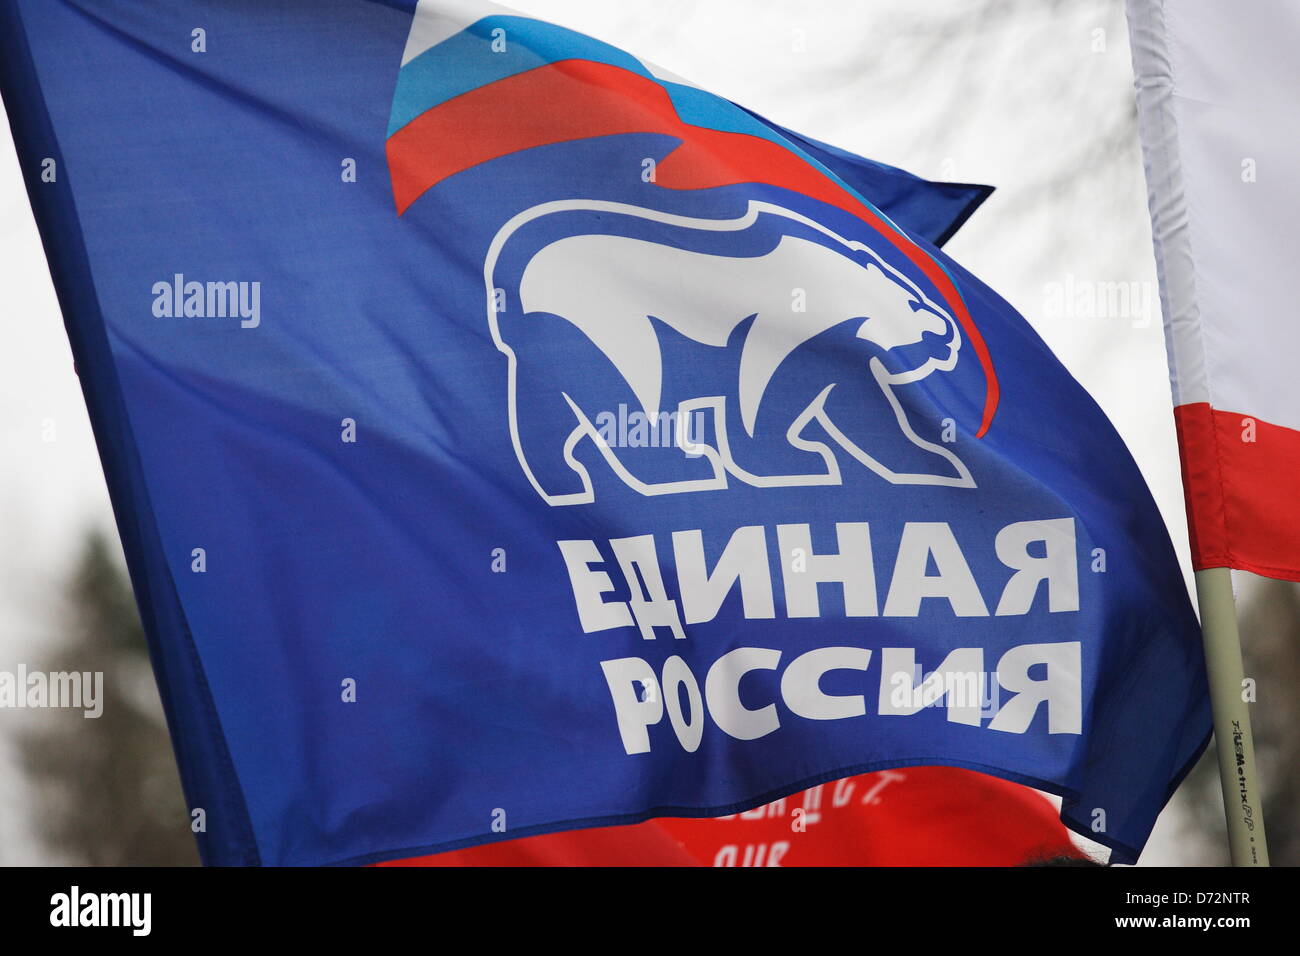 Braniewo, Poland 27th, April 2013 Over 200 bikers come to Poland from Kaliningrad Oblast in Russia to take part in the 68th anniversary of World War II end at the Soviet Army cemetery in Braniewo. Pictured: United Russia pro Russian government party flag. Credit: Michal Fludra/Alamy Live News Stock Photo